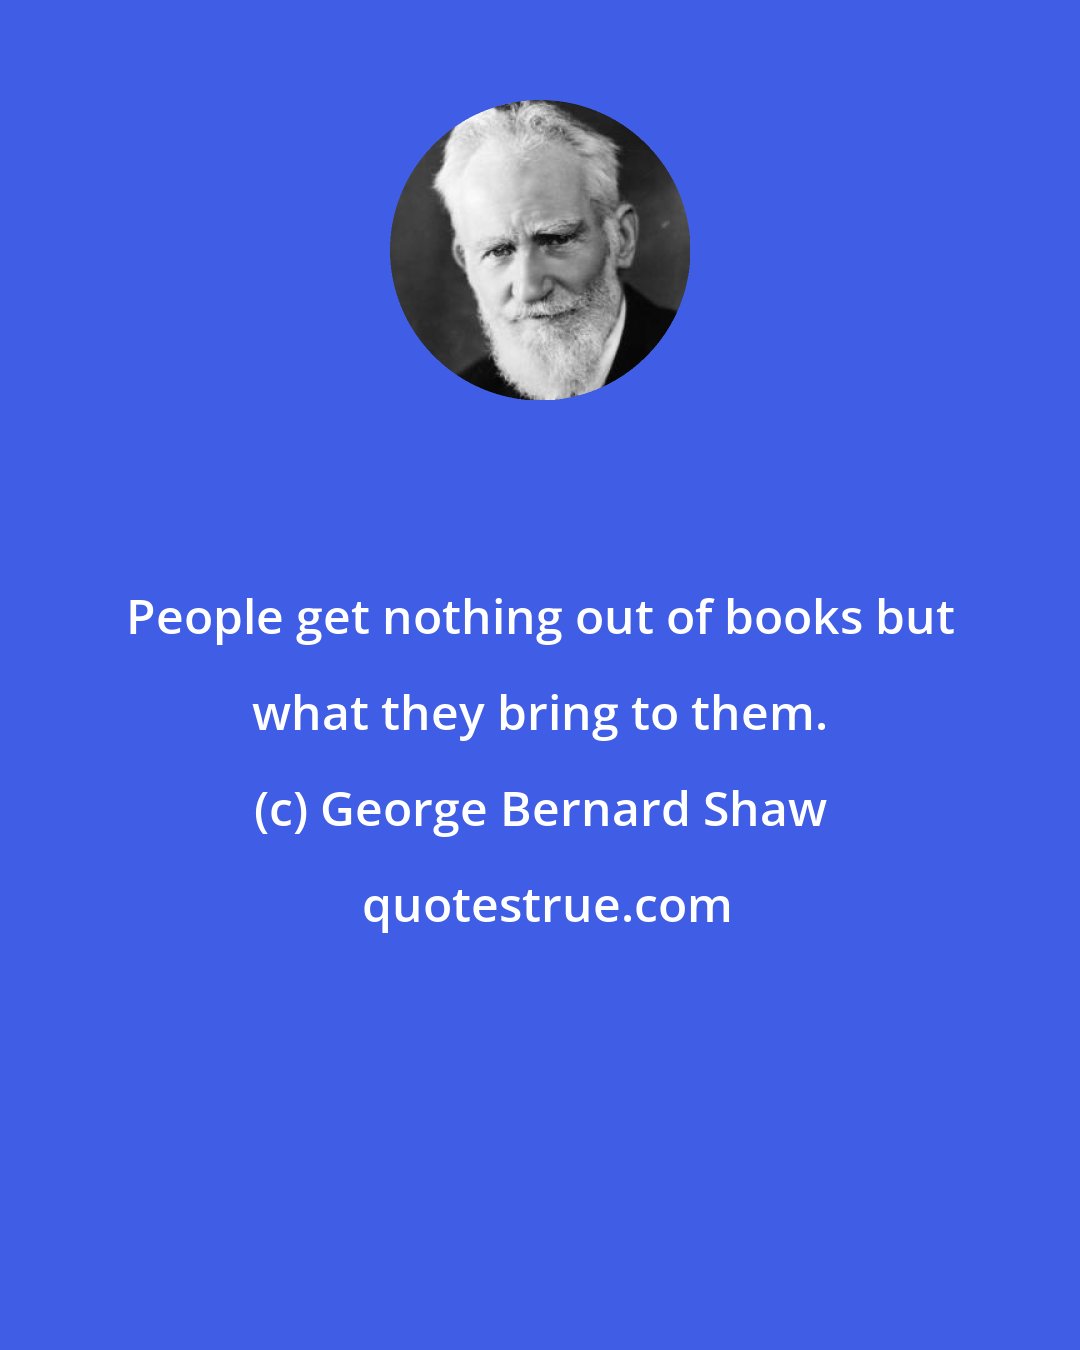 George Bernard Shaw: People get nothing out of books but what they bring to them.